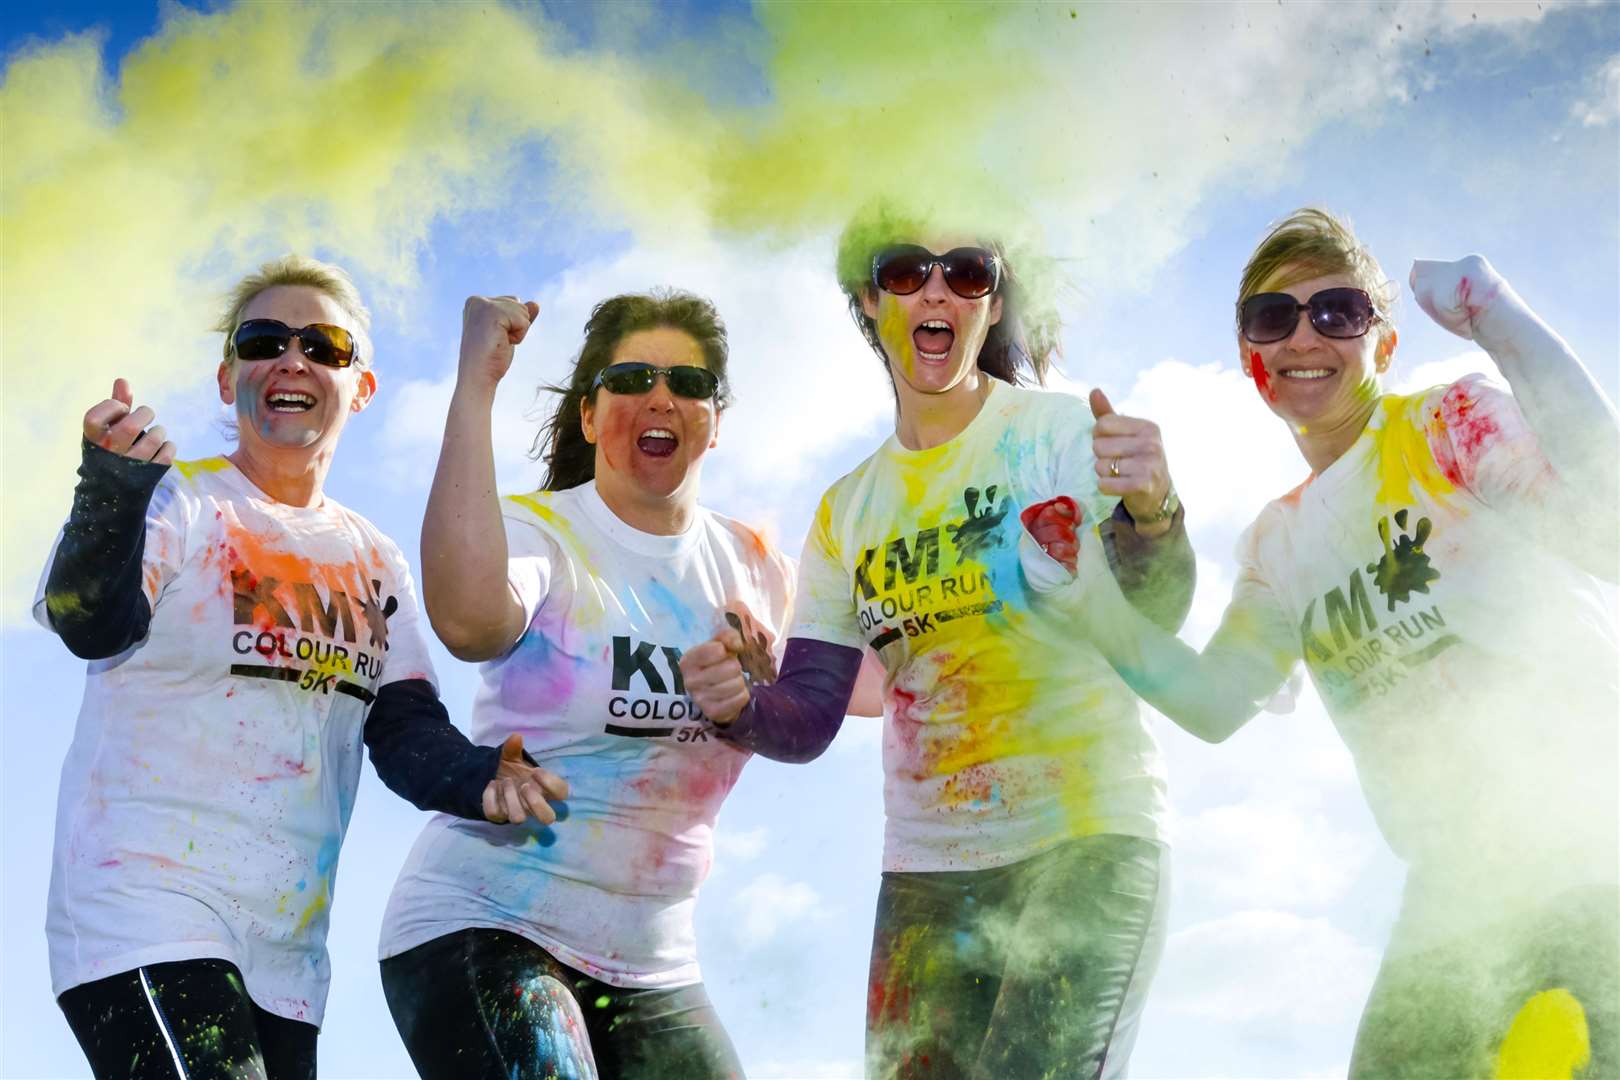 Run, jog or walk the KM Colour Run 5K for fun or for any charity. (48916996)